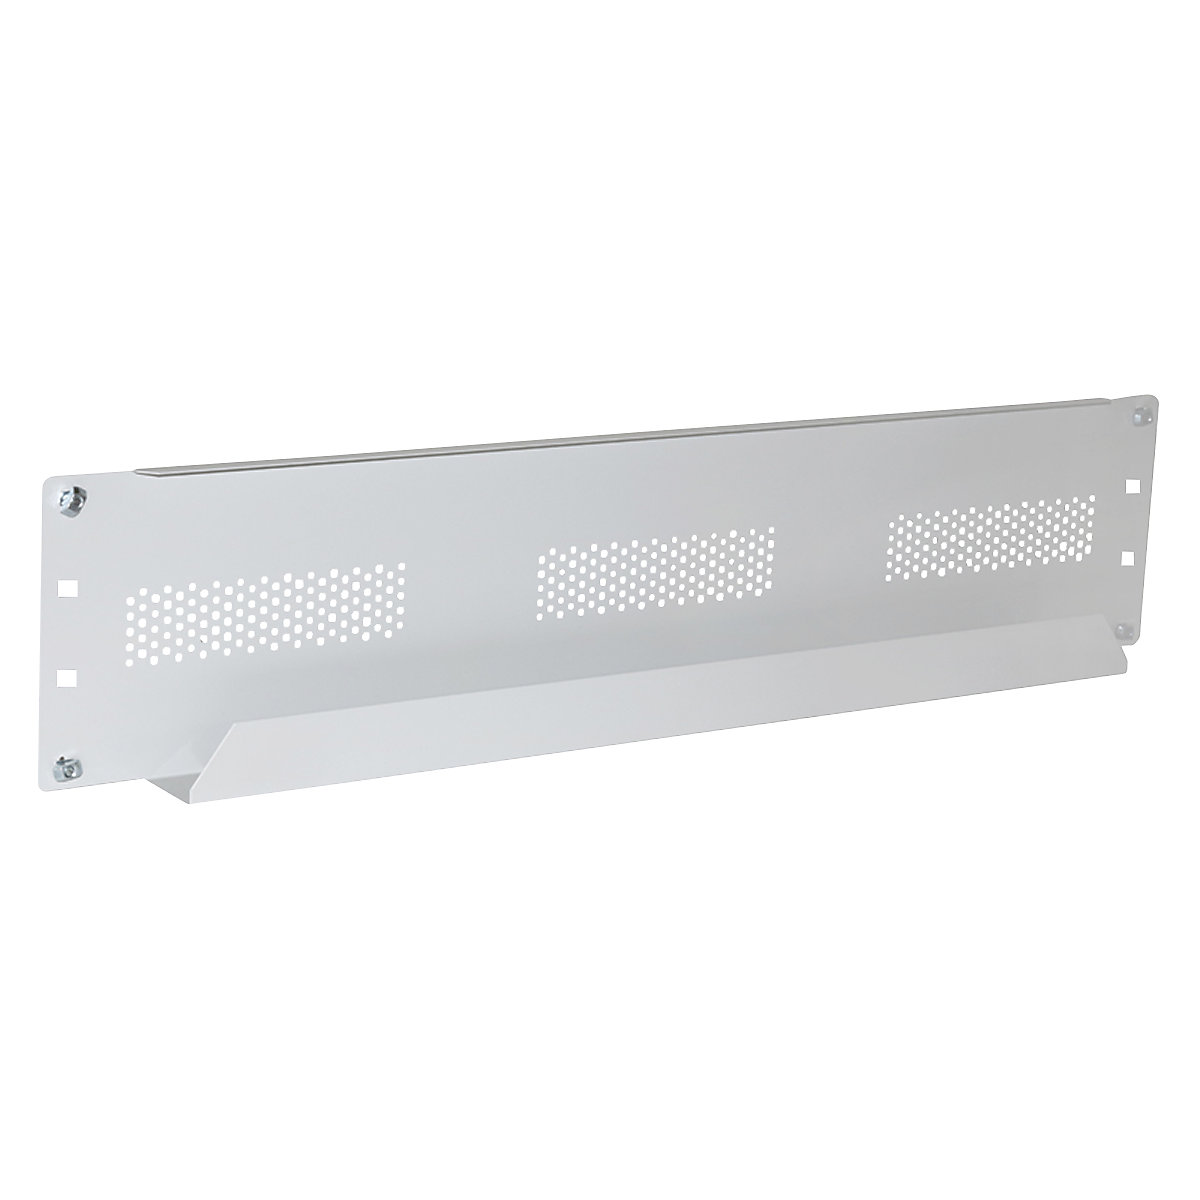 Cable tray for work tables - Treston